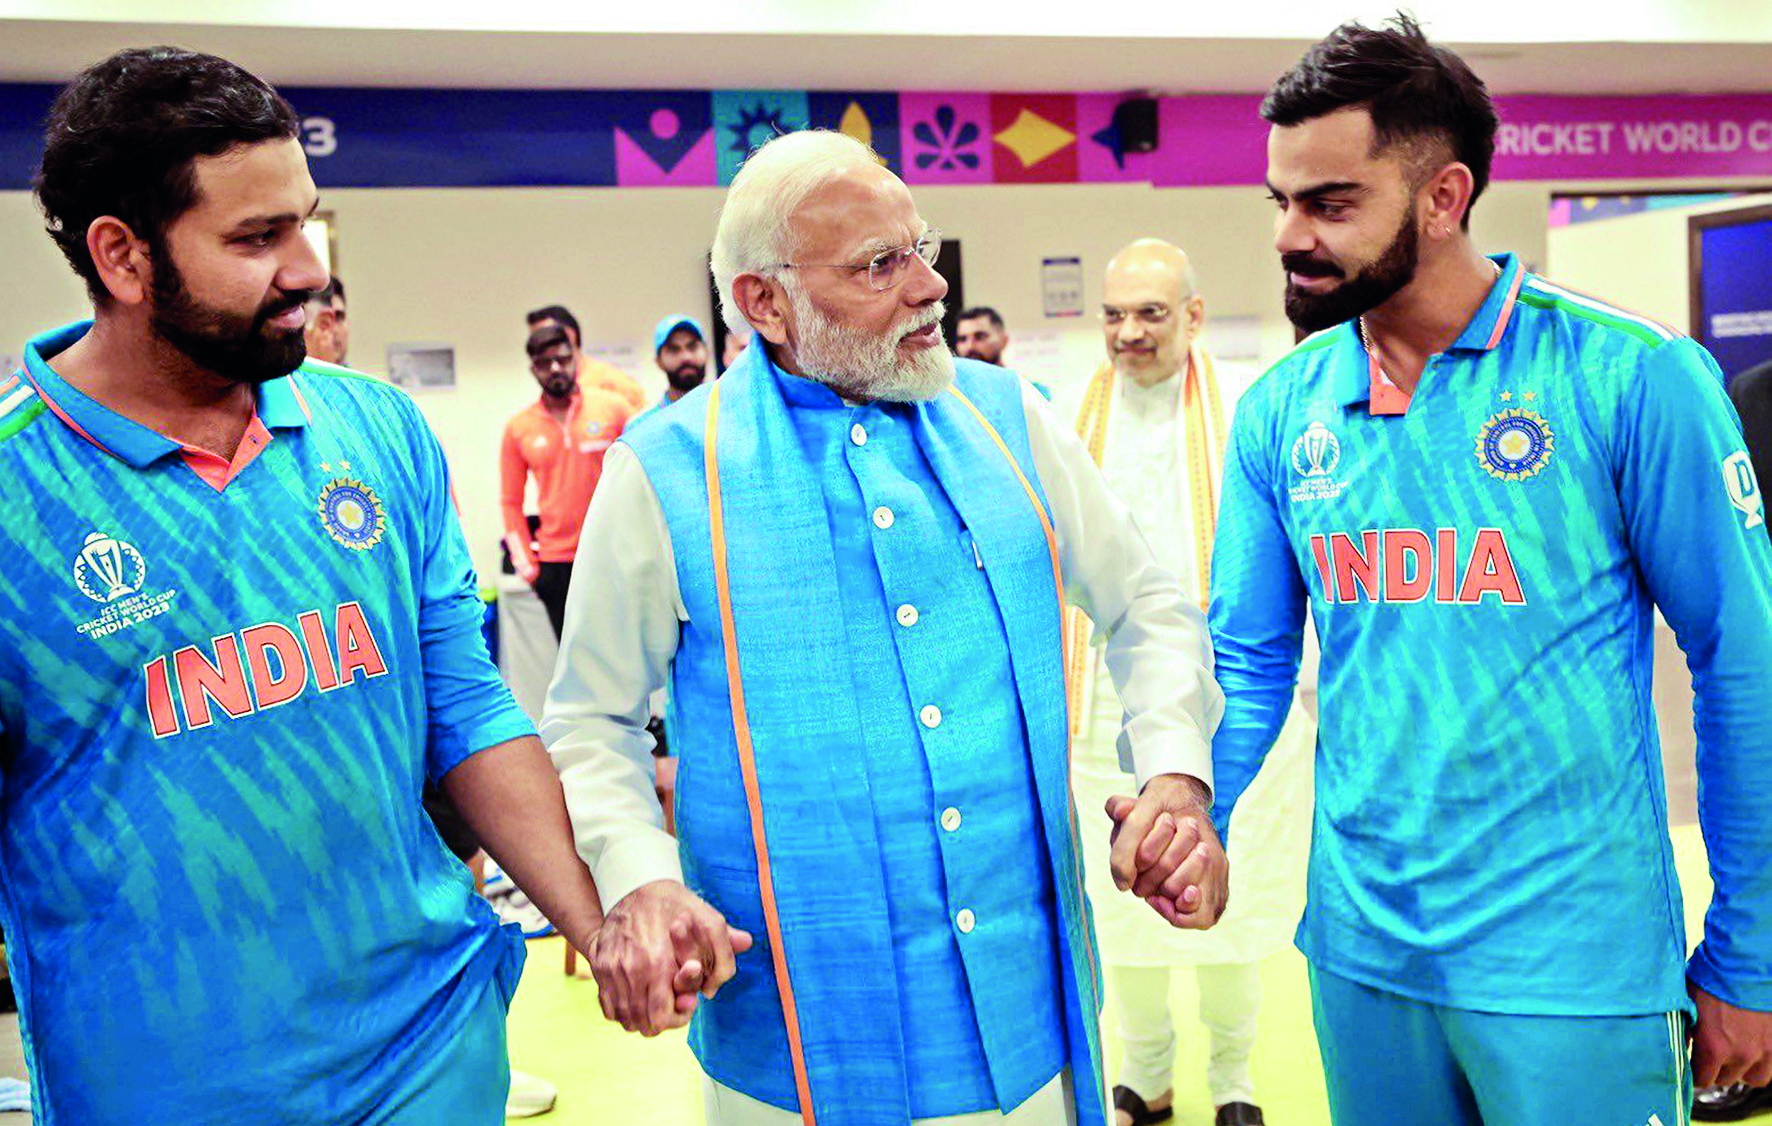 Country stands with Indian team today and always: PM Modi after its WC loss